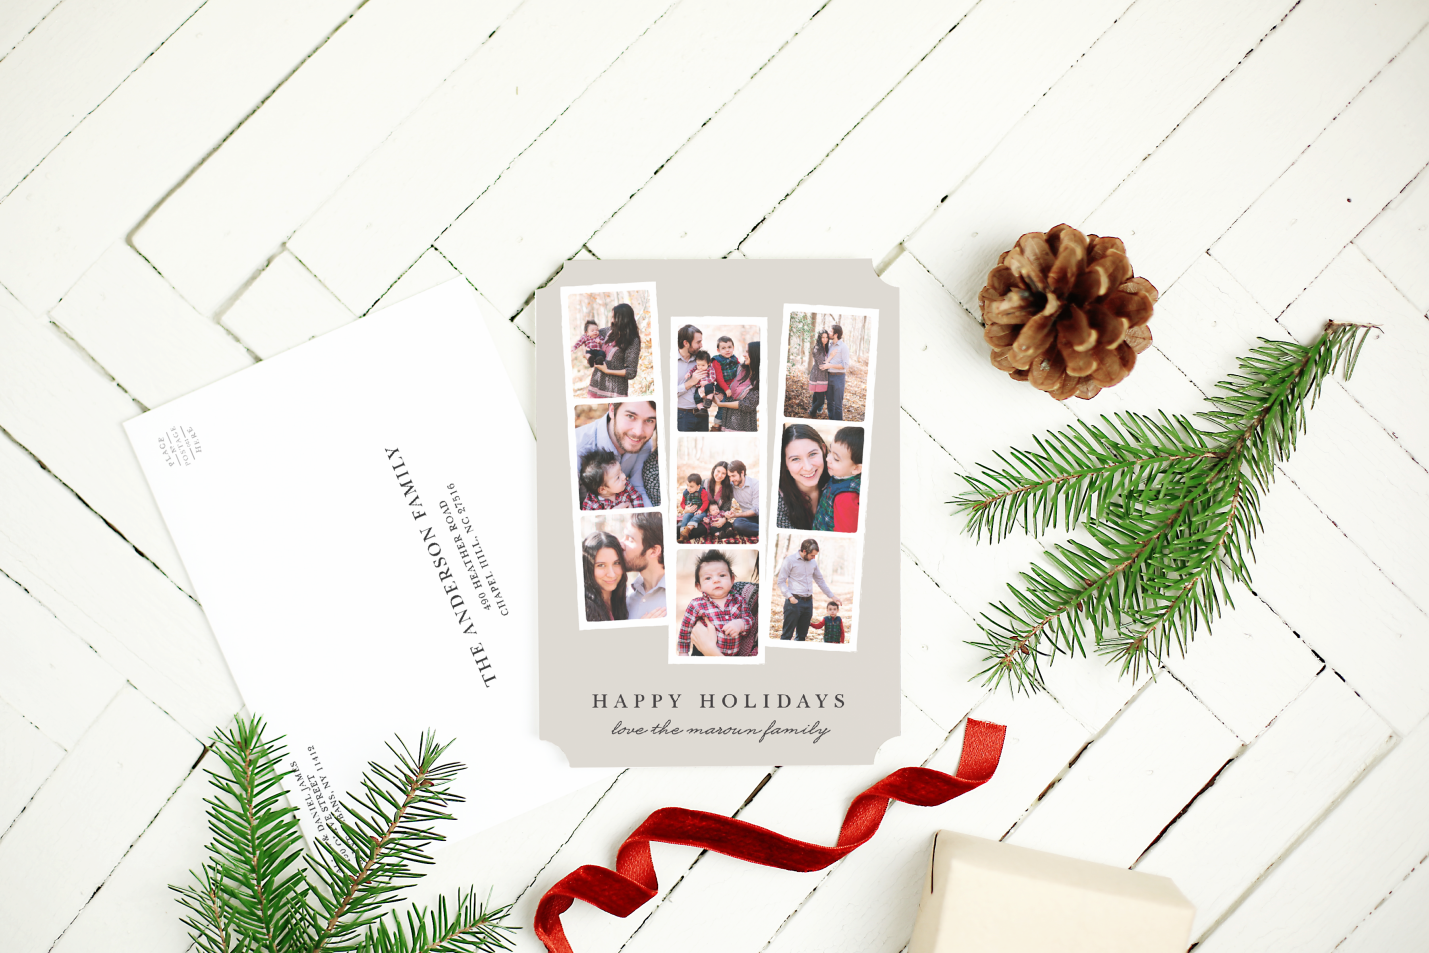 C:\Users\Tahir Mehmood\Downloads\New folder (2)\Holiday Chritmas Cards\holiday_christmas_cards_16.png